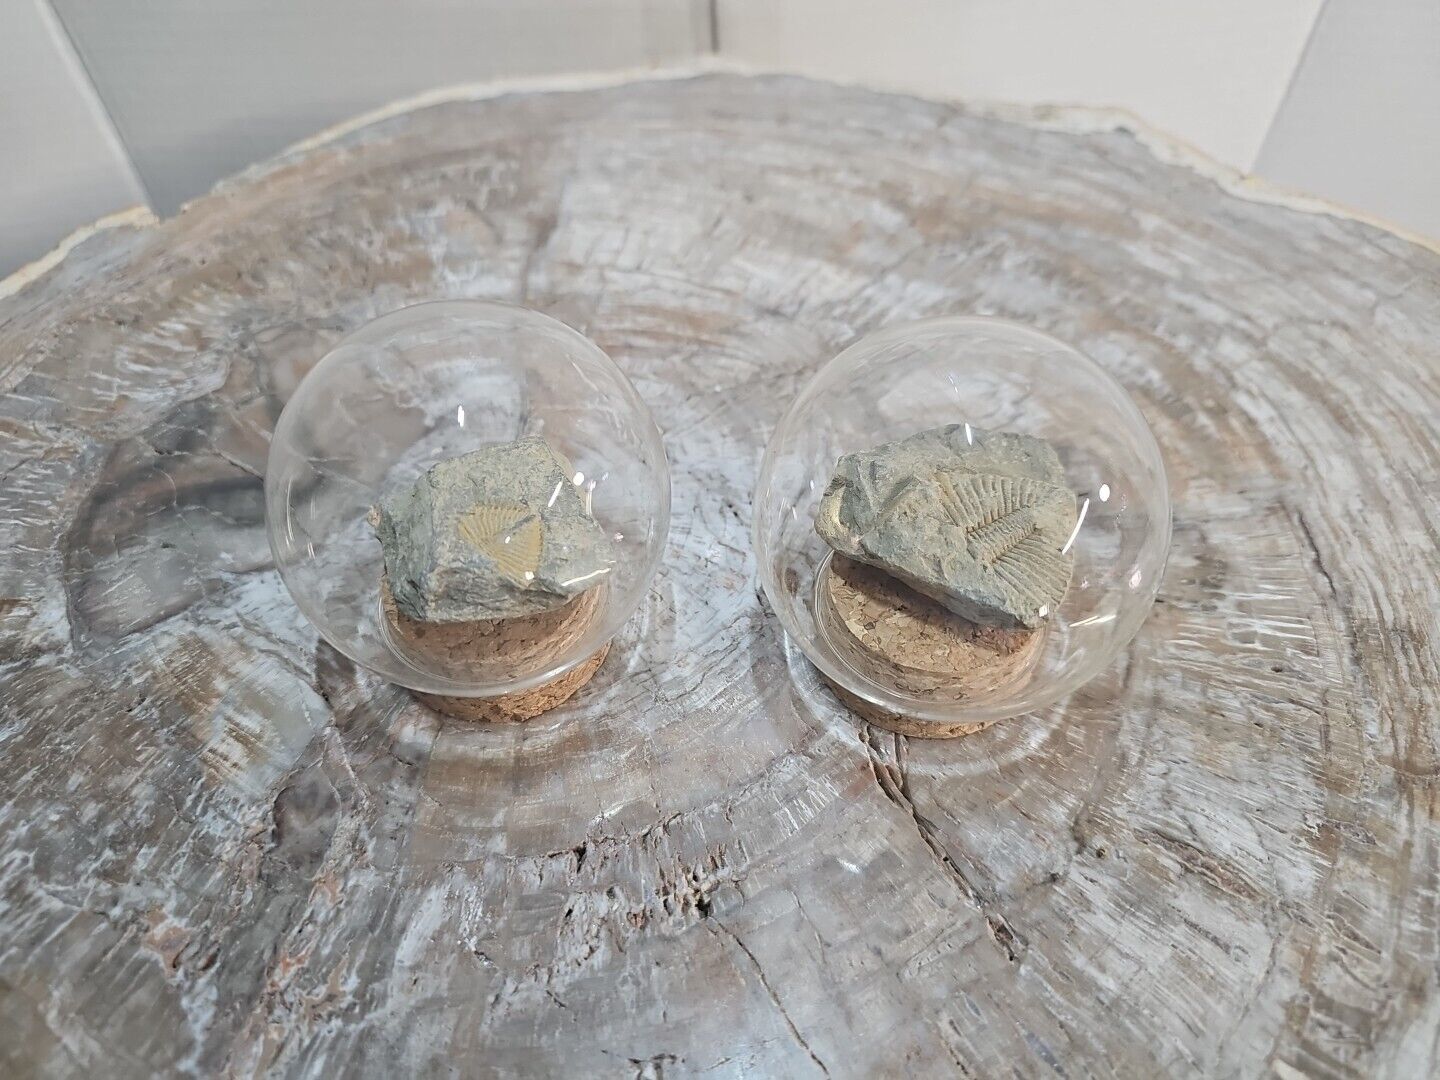 2pcs Crystals rocks fossils minerals In Glass Dome For Show